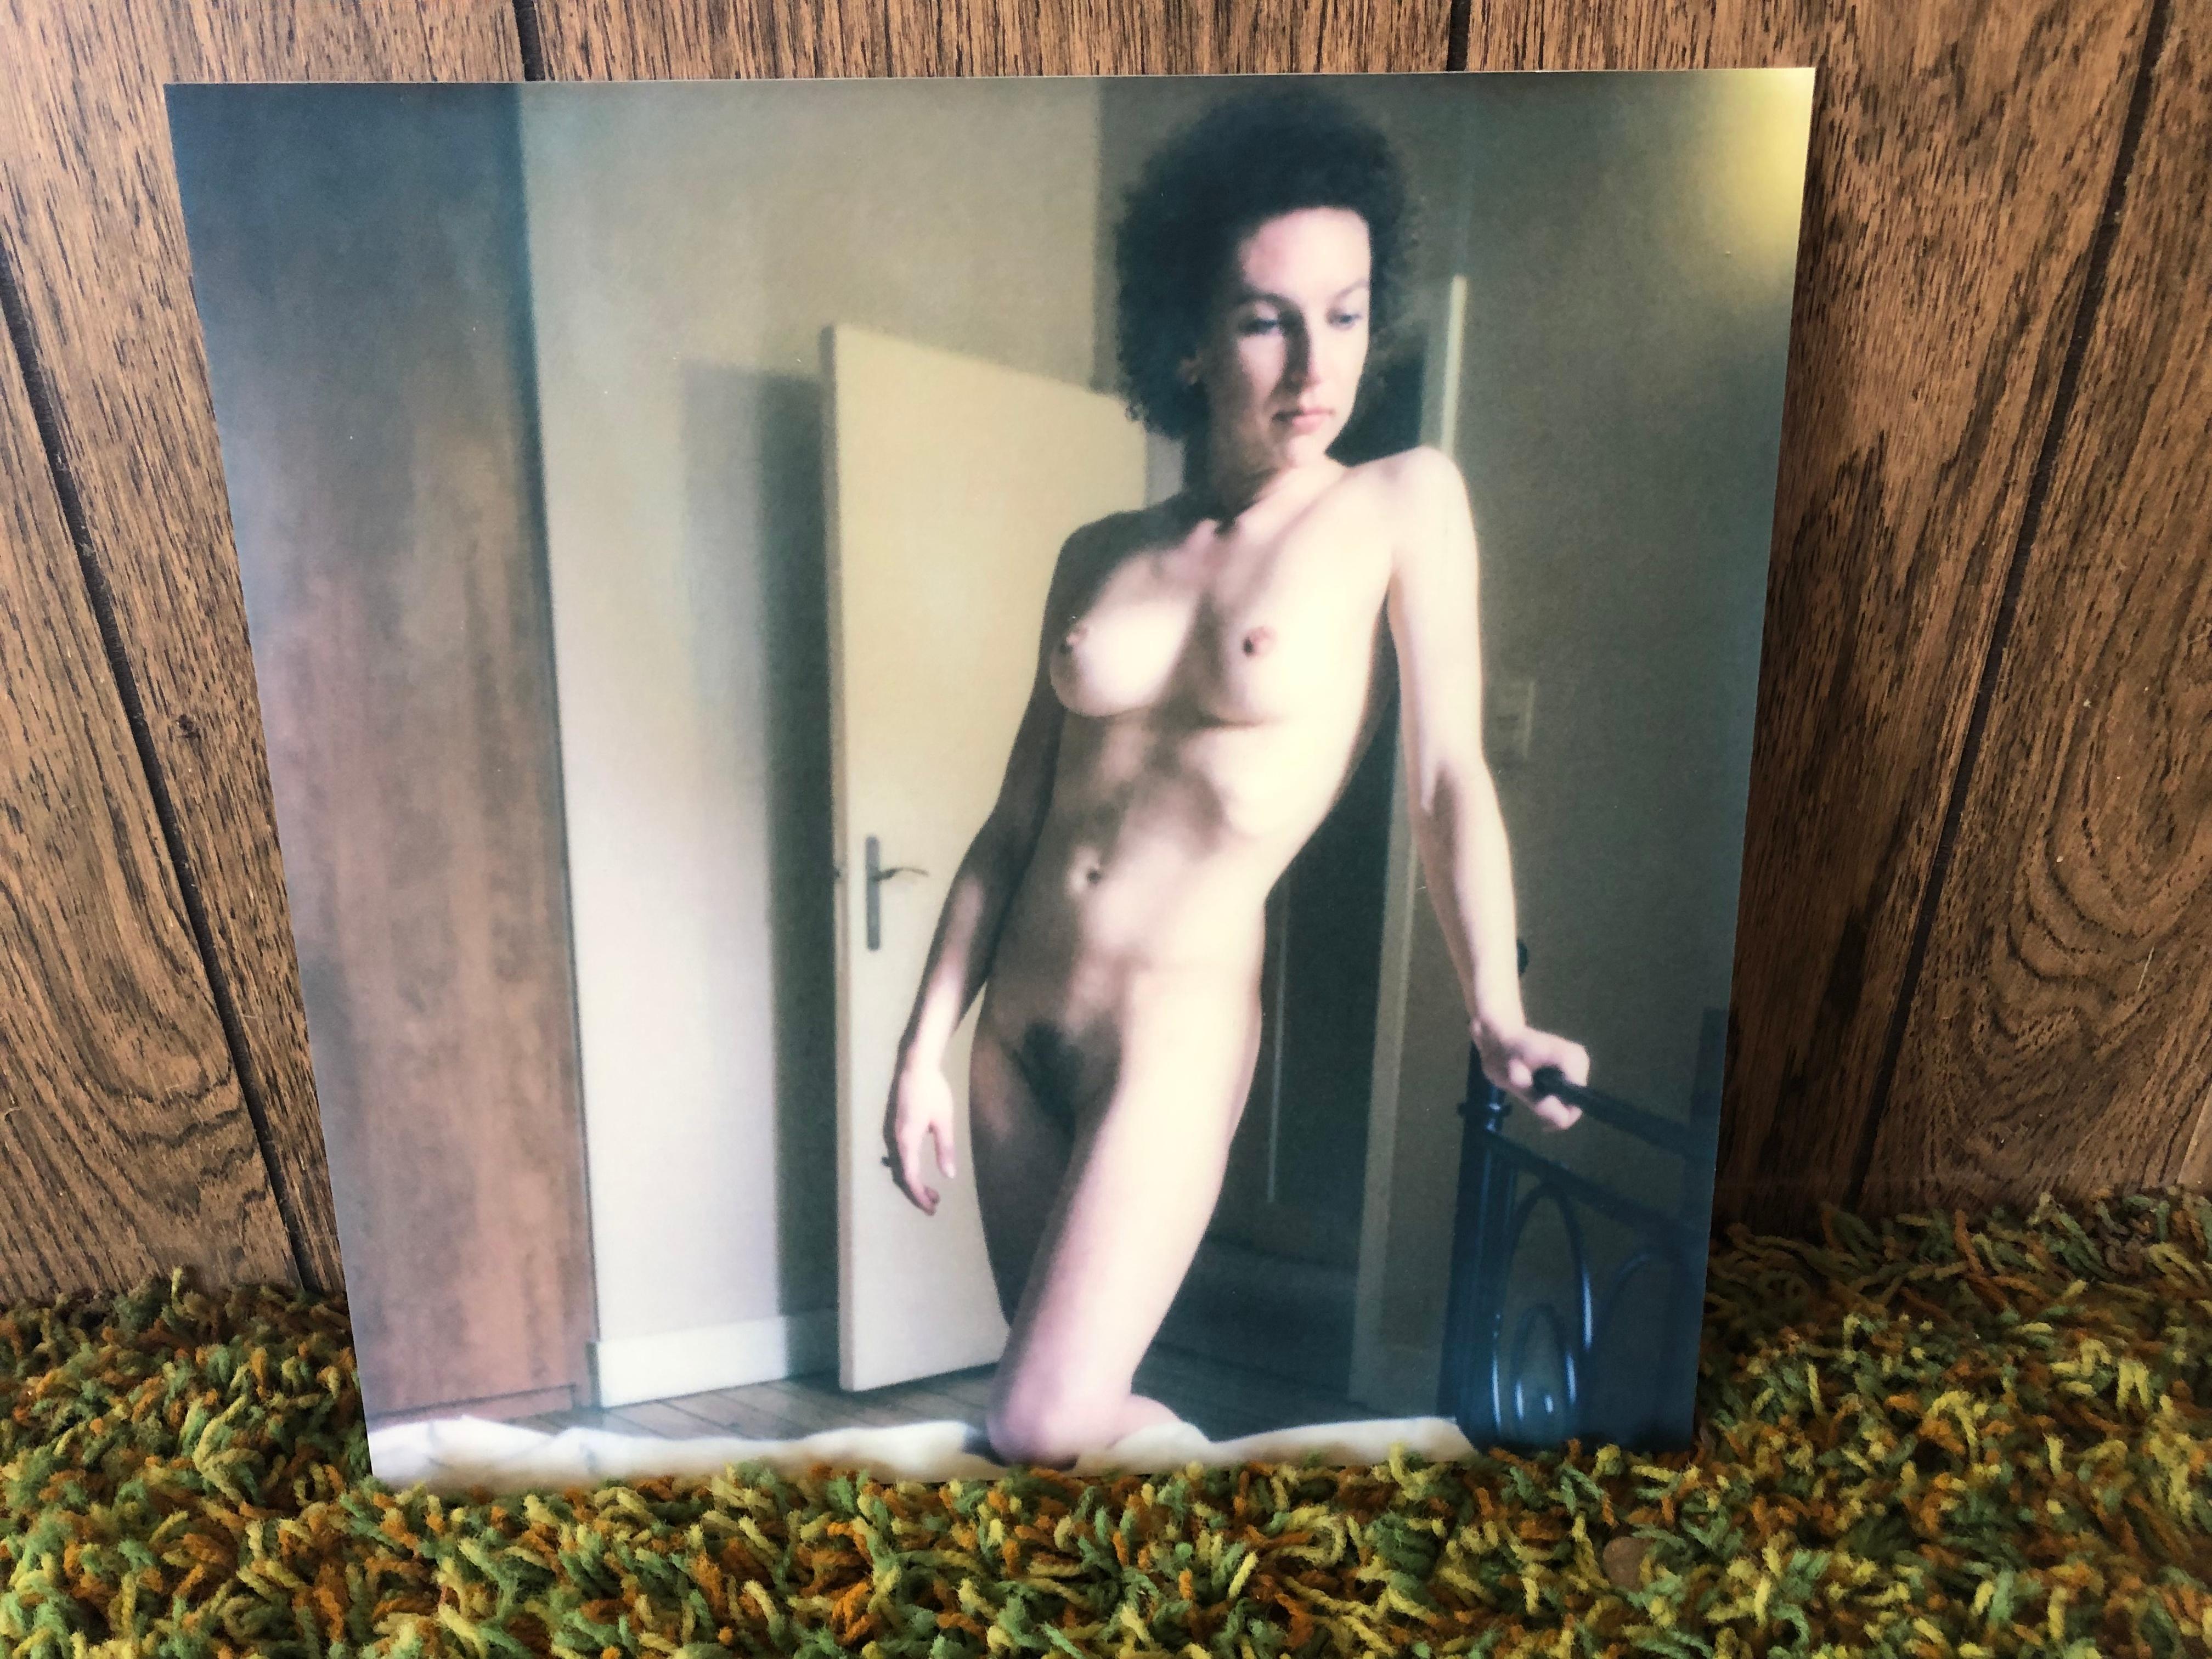 Missing, 50x50cm, 21st Century, Polaroid, Nude Photography For Sale 3